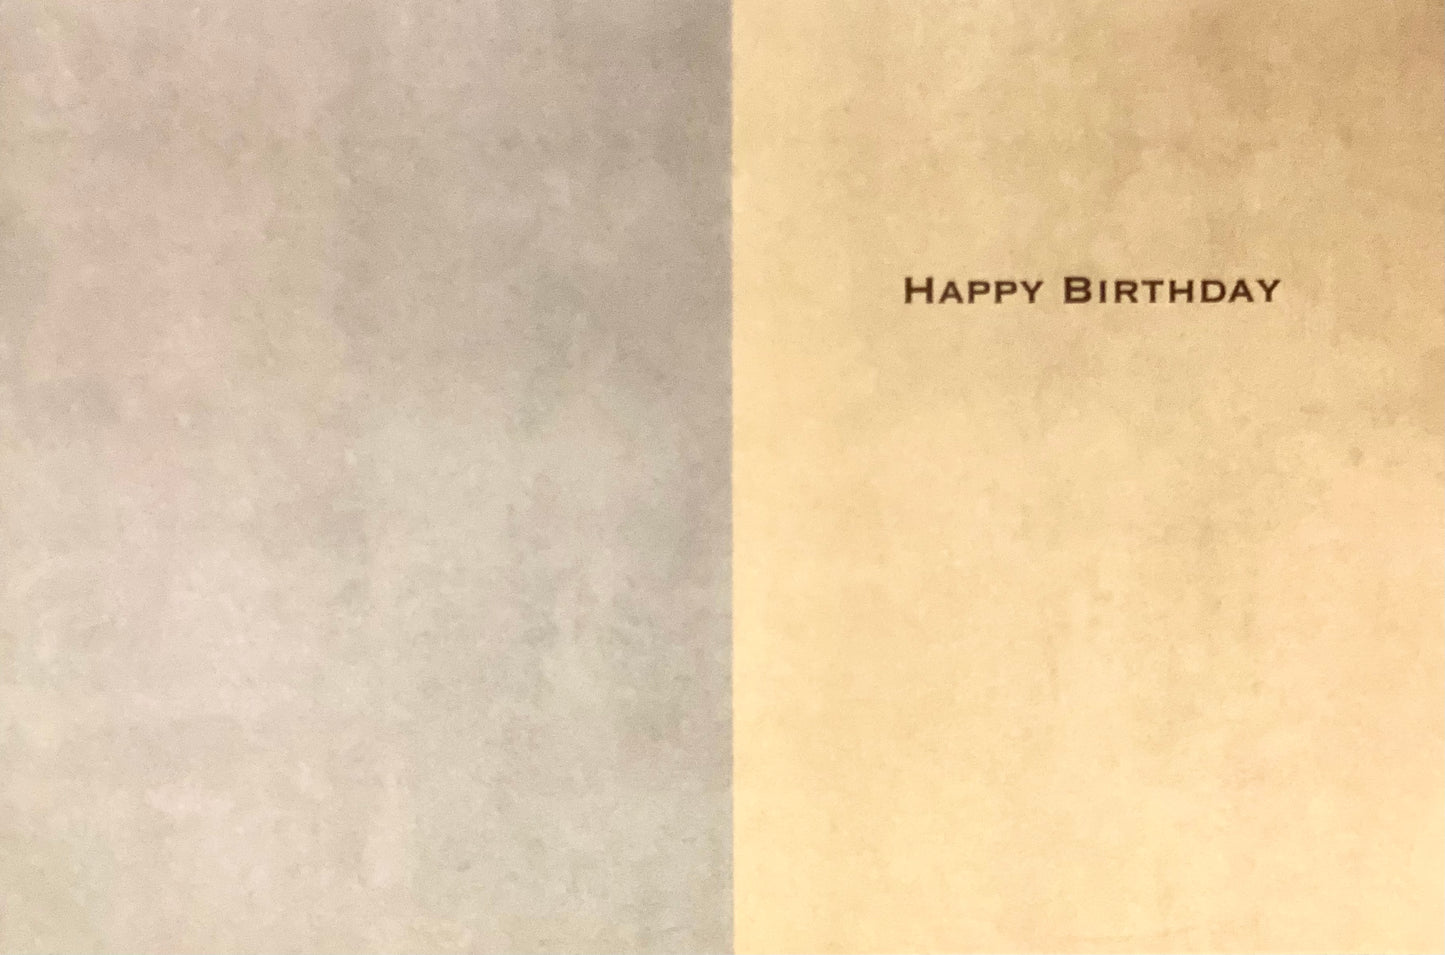 Birthday Greeting Cards | The True Measure of A Man